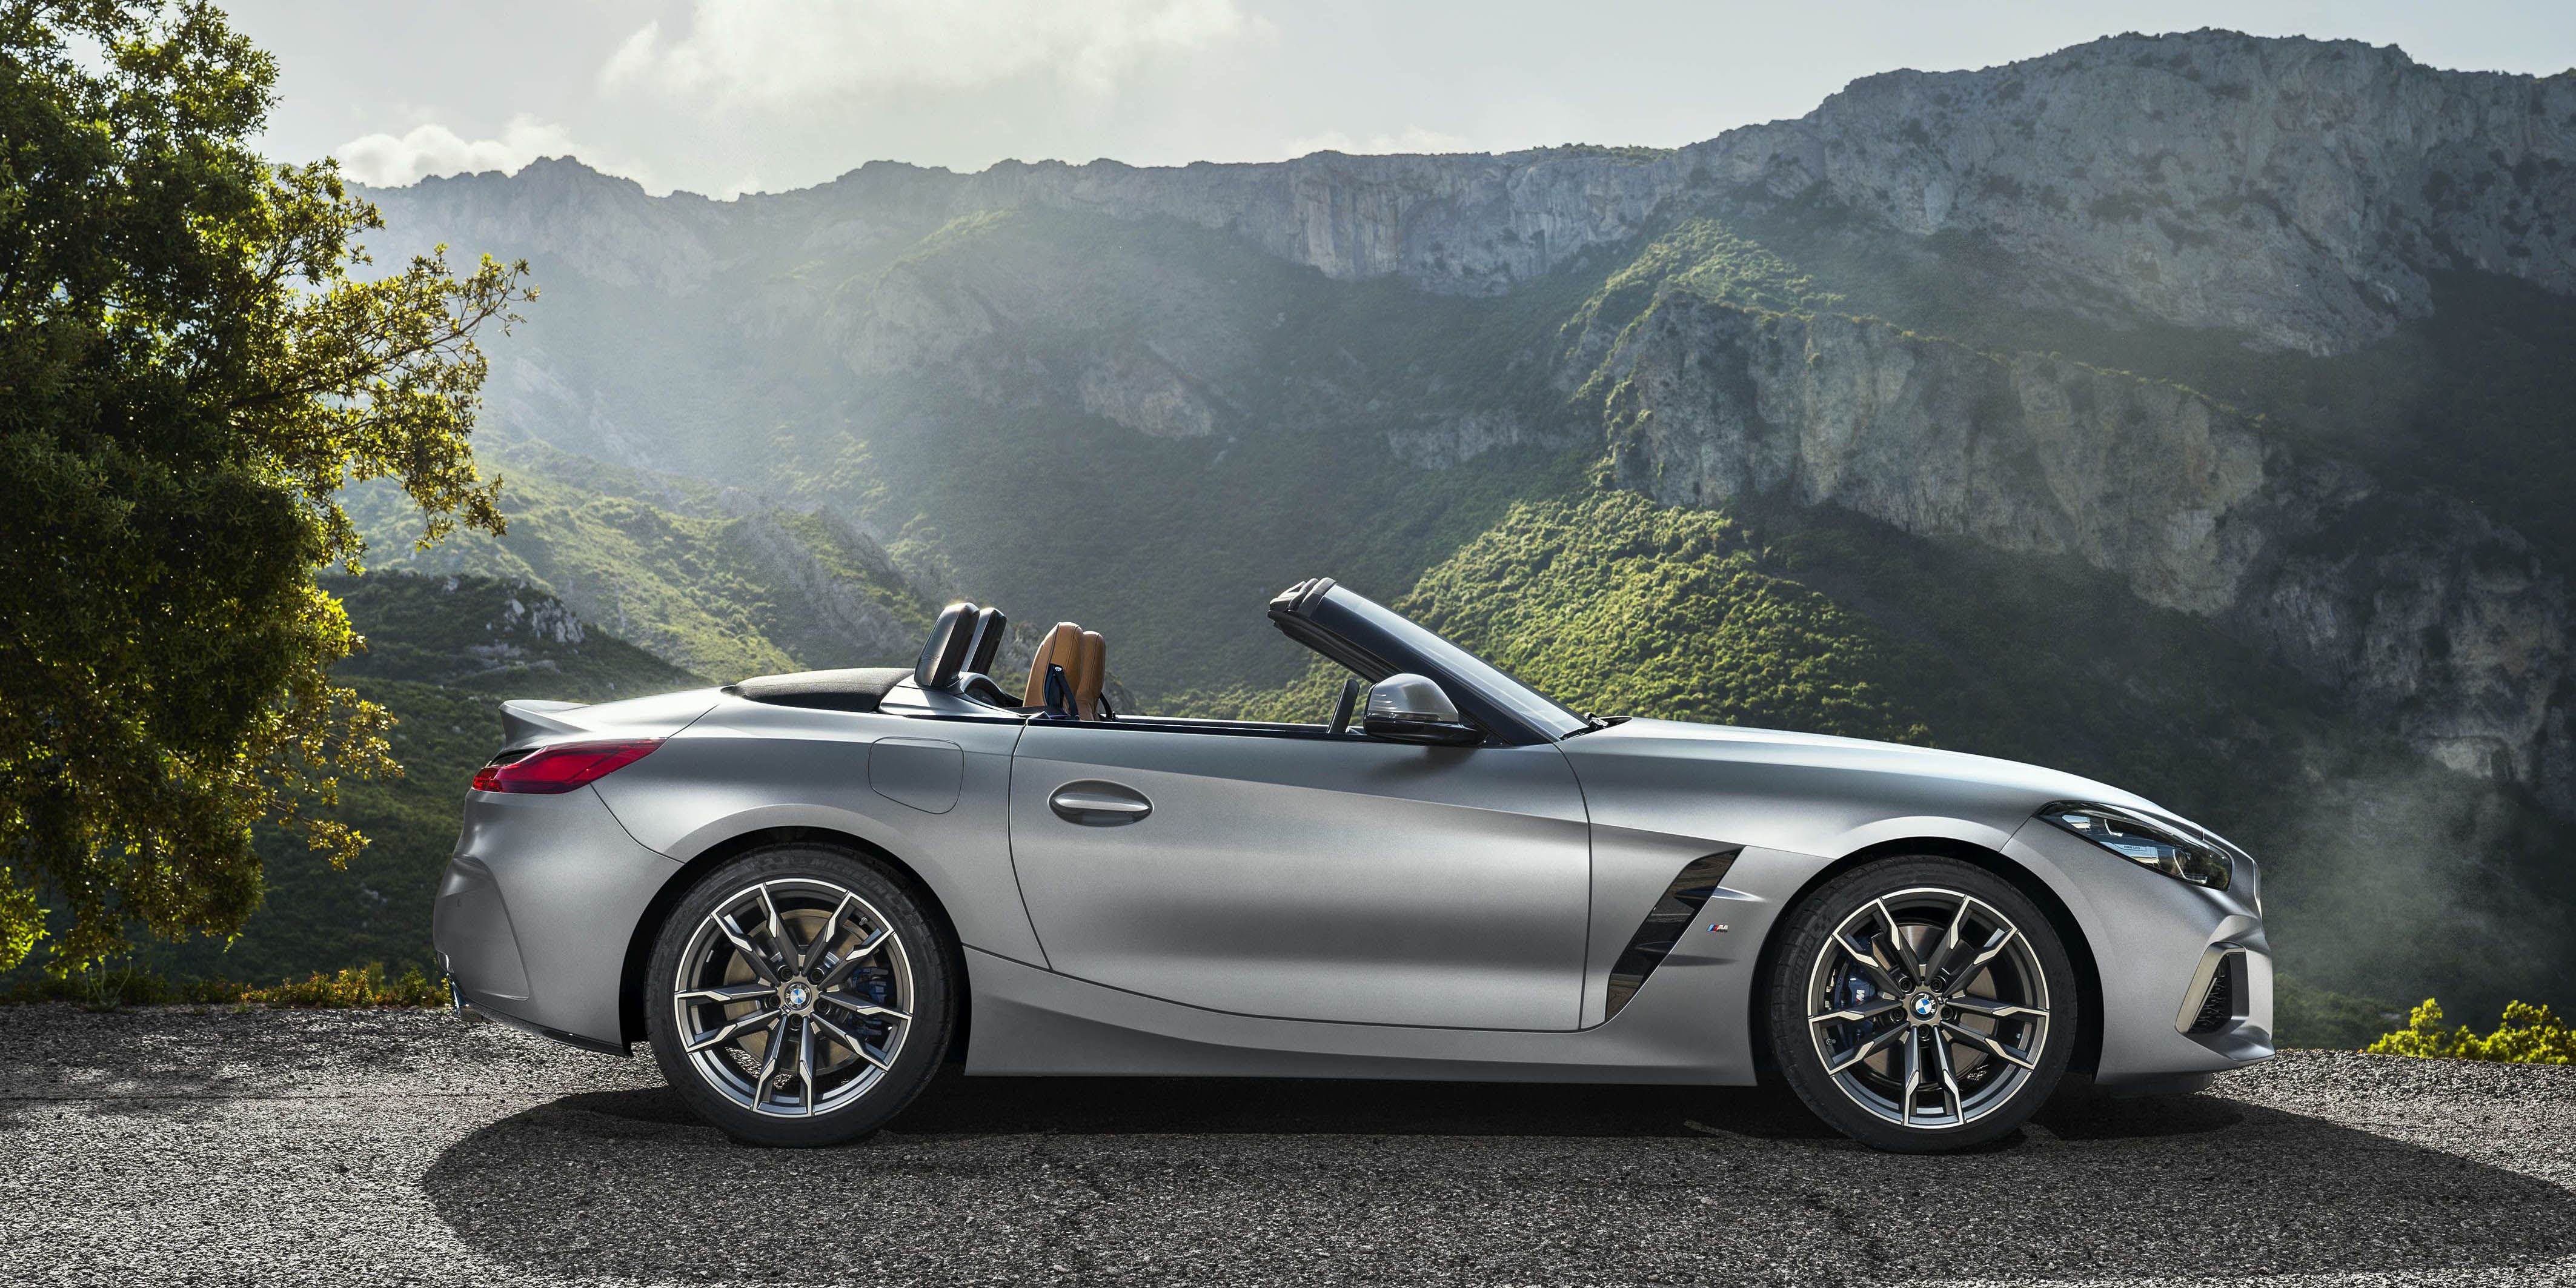 2019 Bmw Z4 Specs New Z4 Convertible Price Horsepower And Pictures